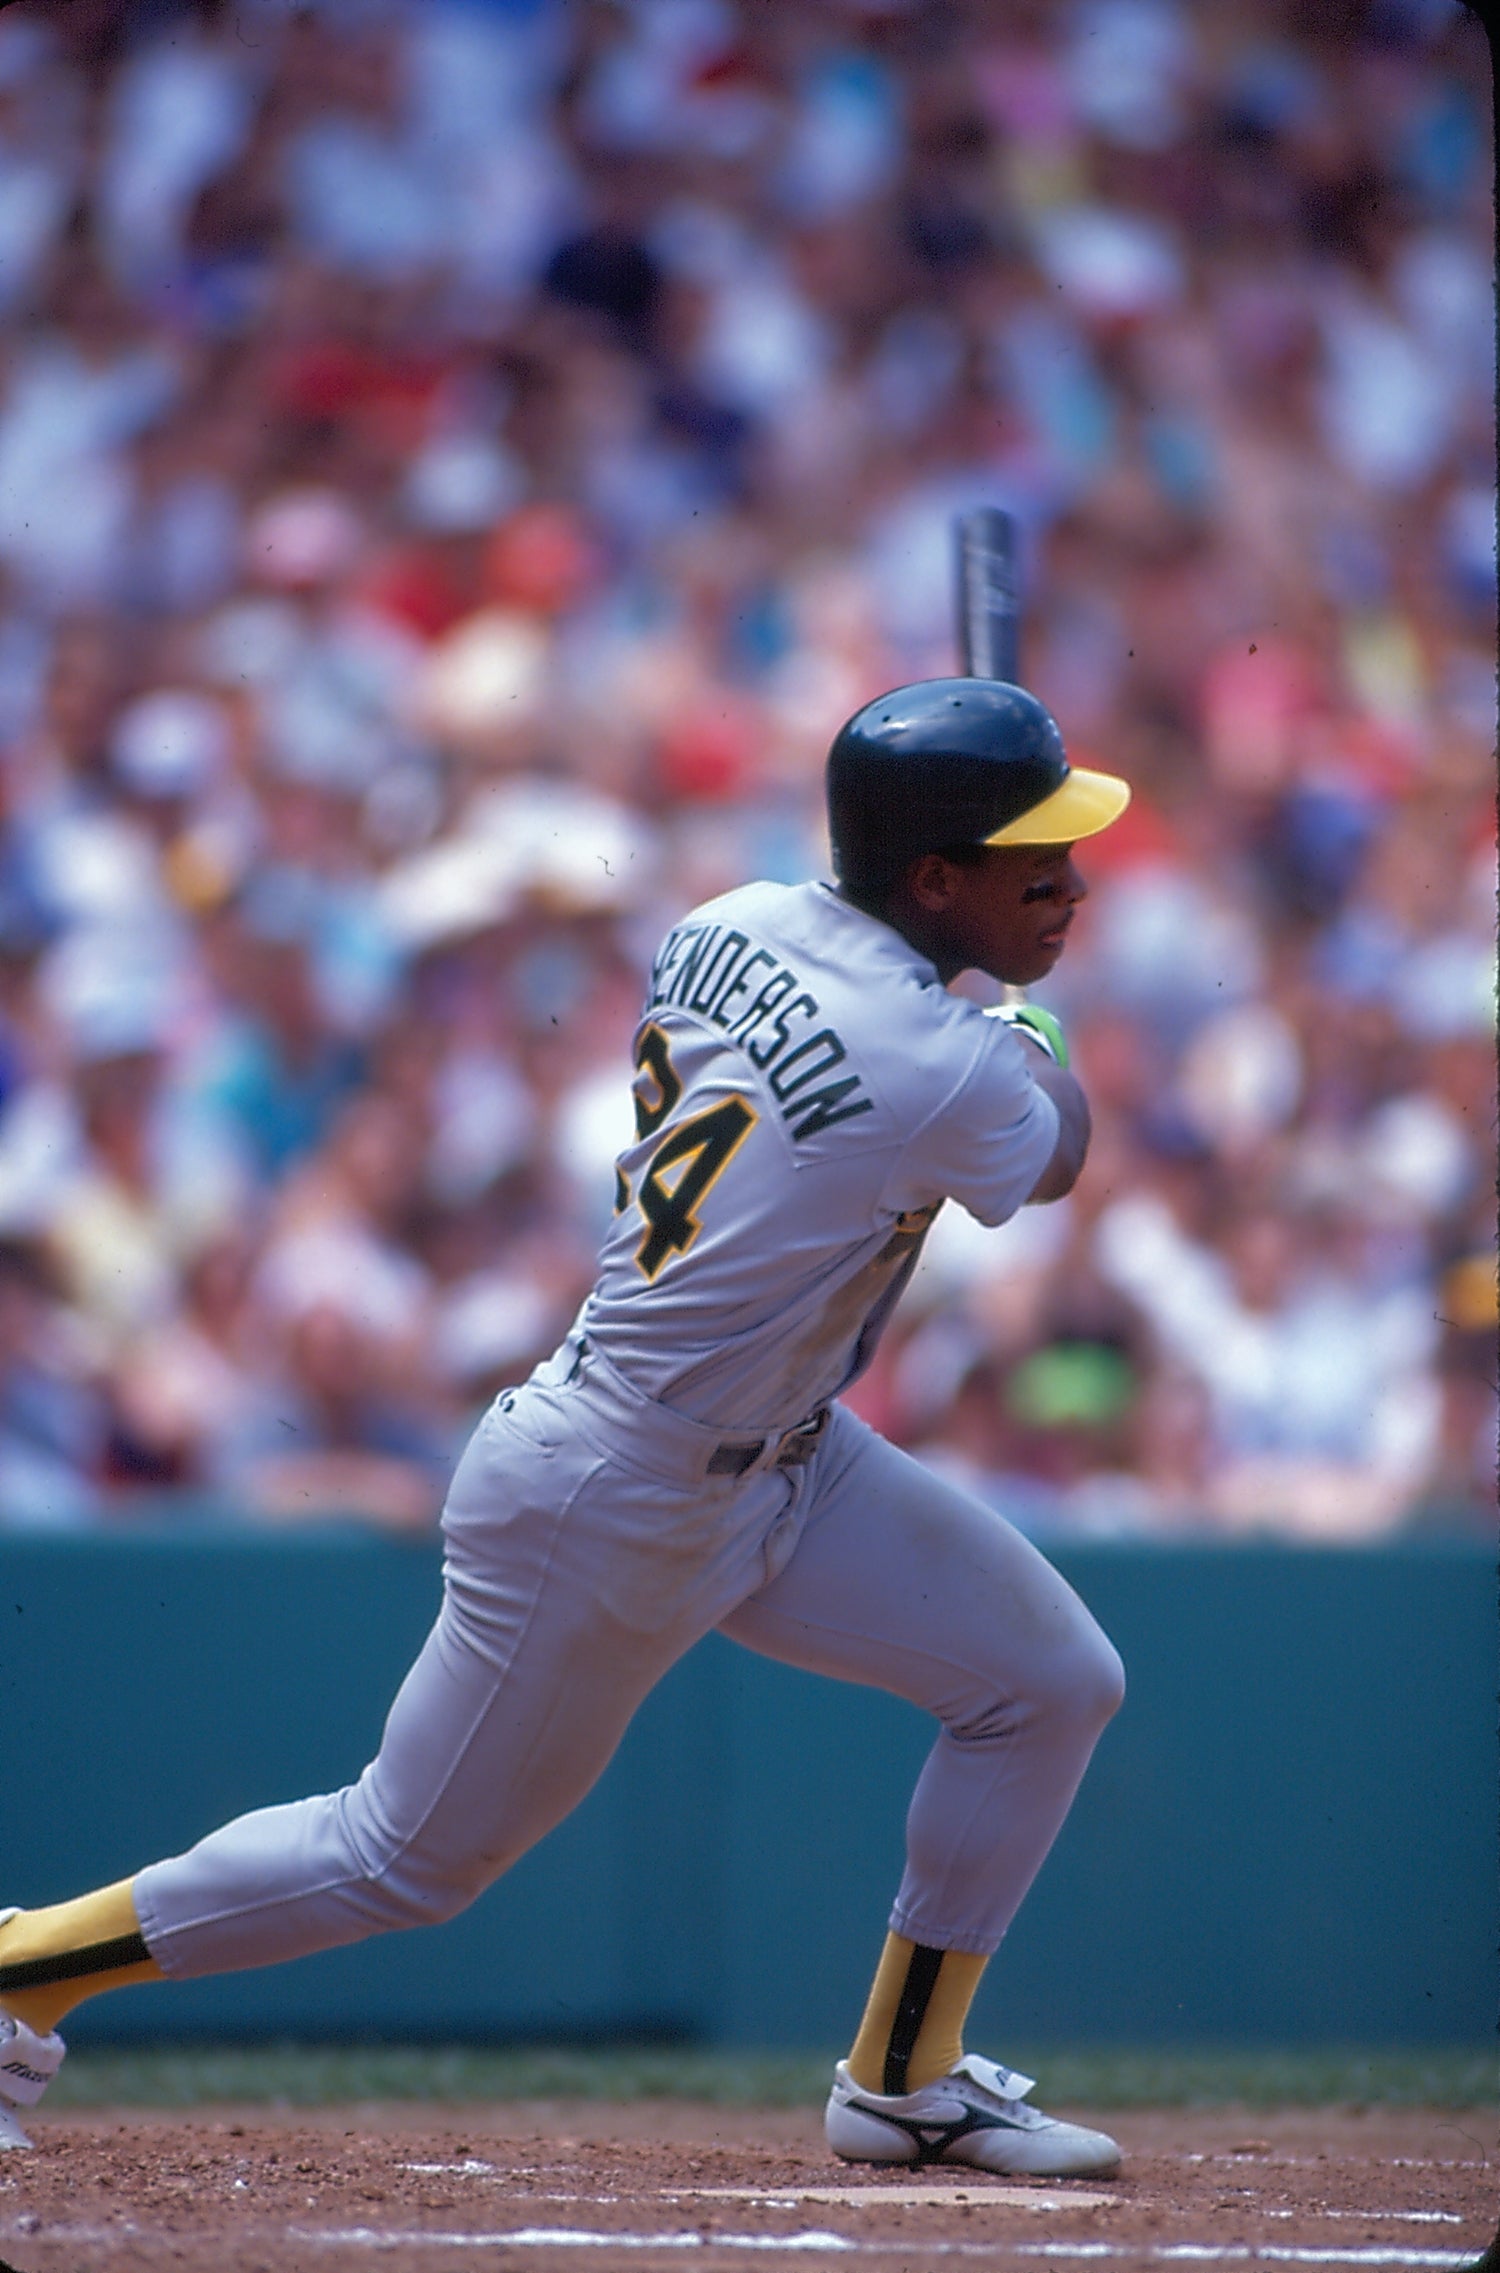 Rickey Henderson’s two RBI lead A’s to 11th straight win to start 1981 season